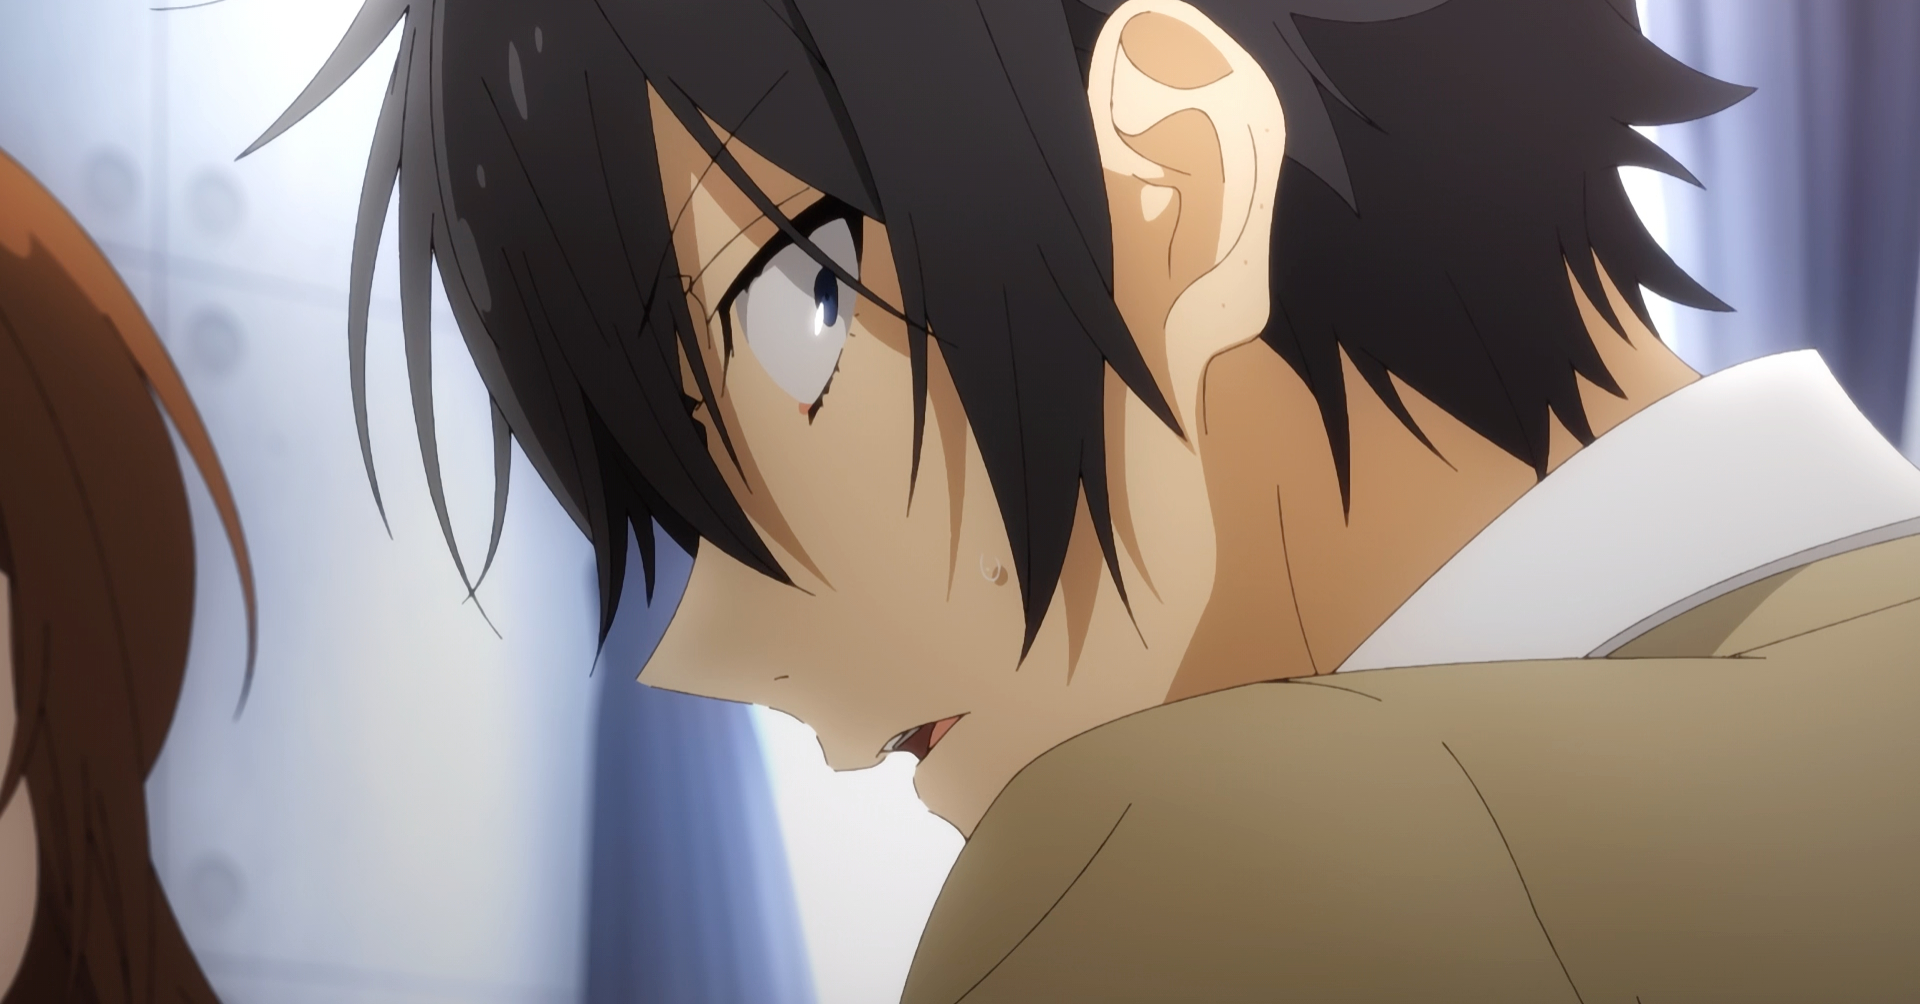 Is it weird if I wanna Dominate Miyamura in bed as a straight male